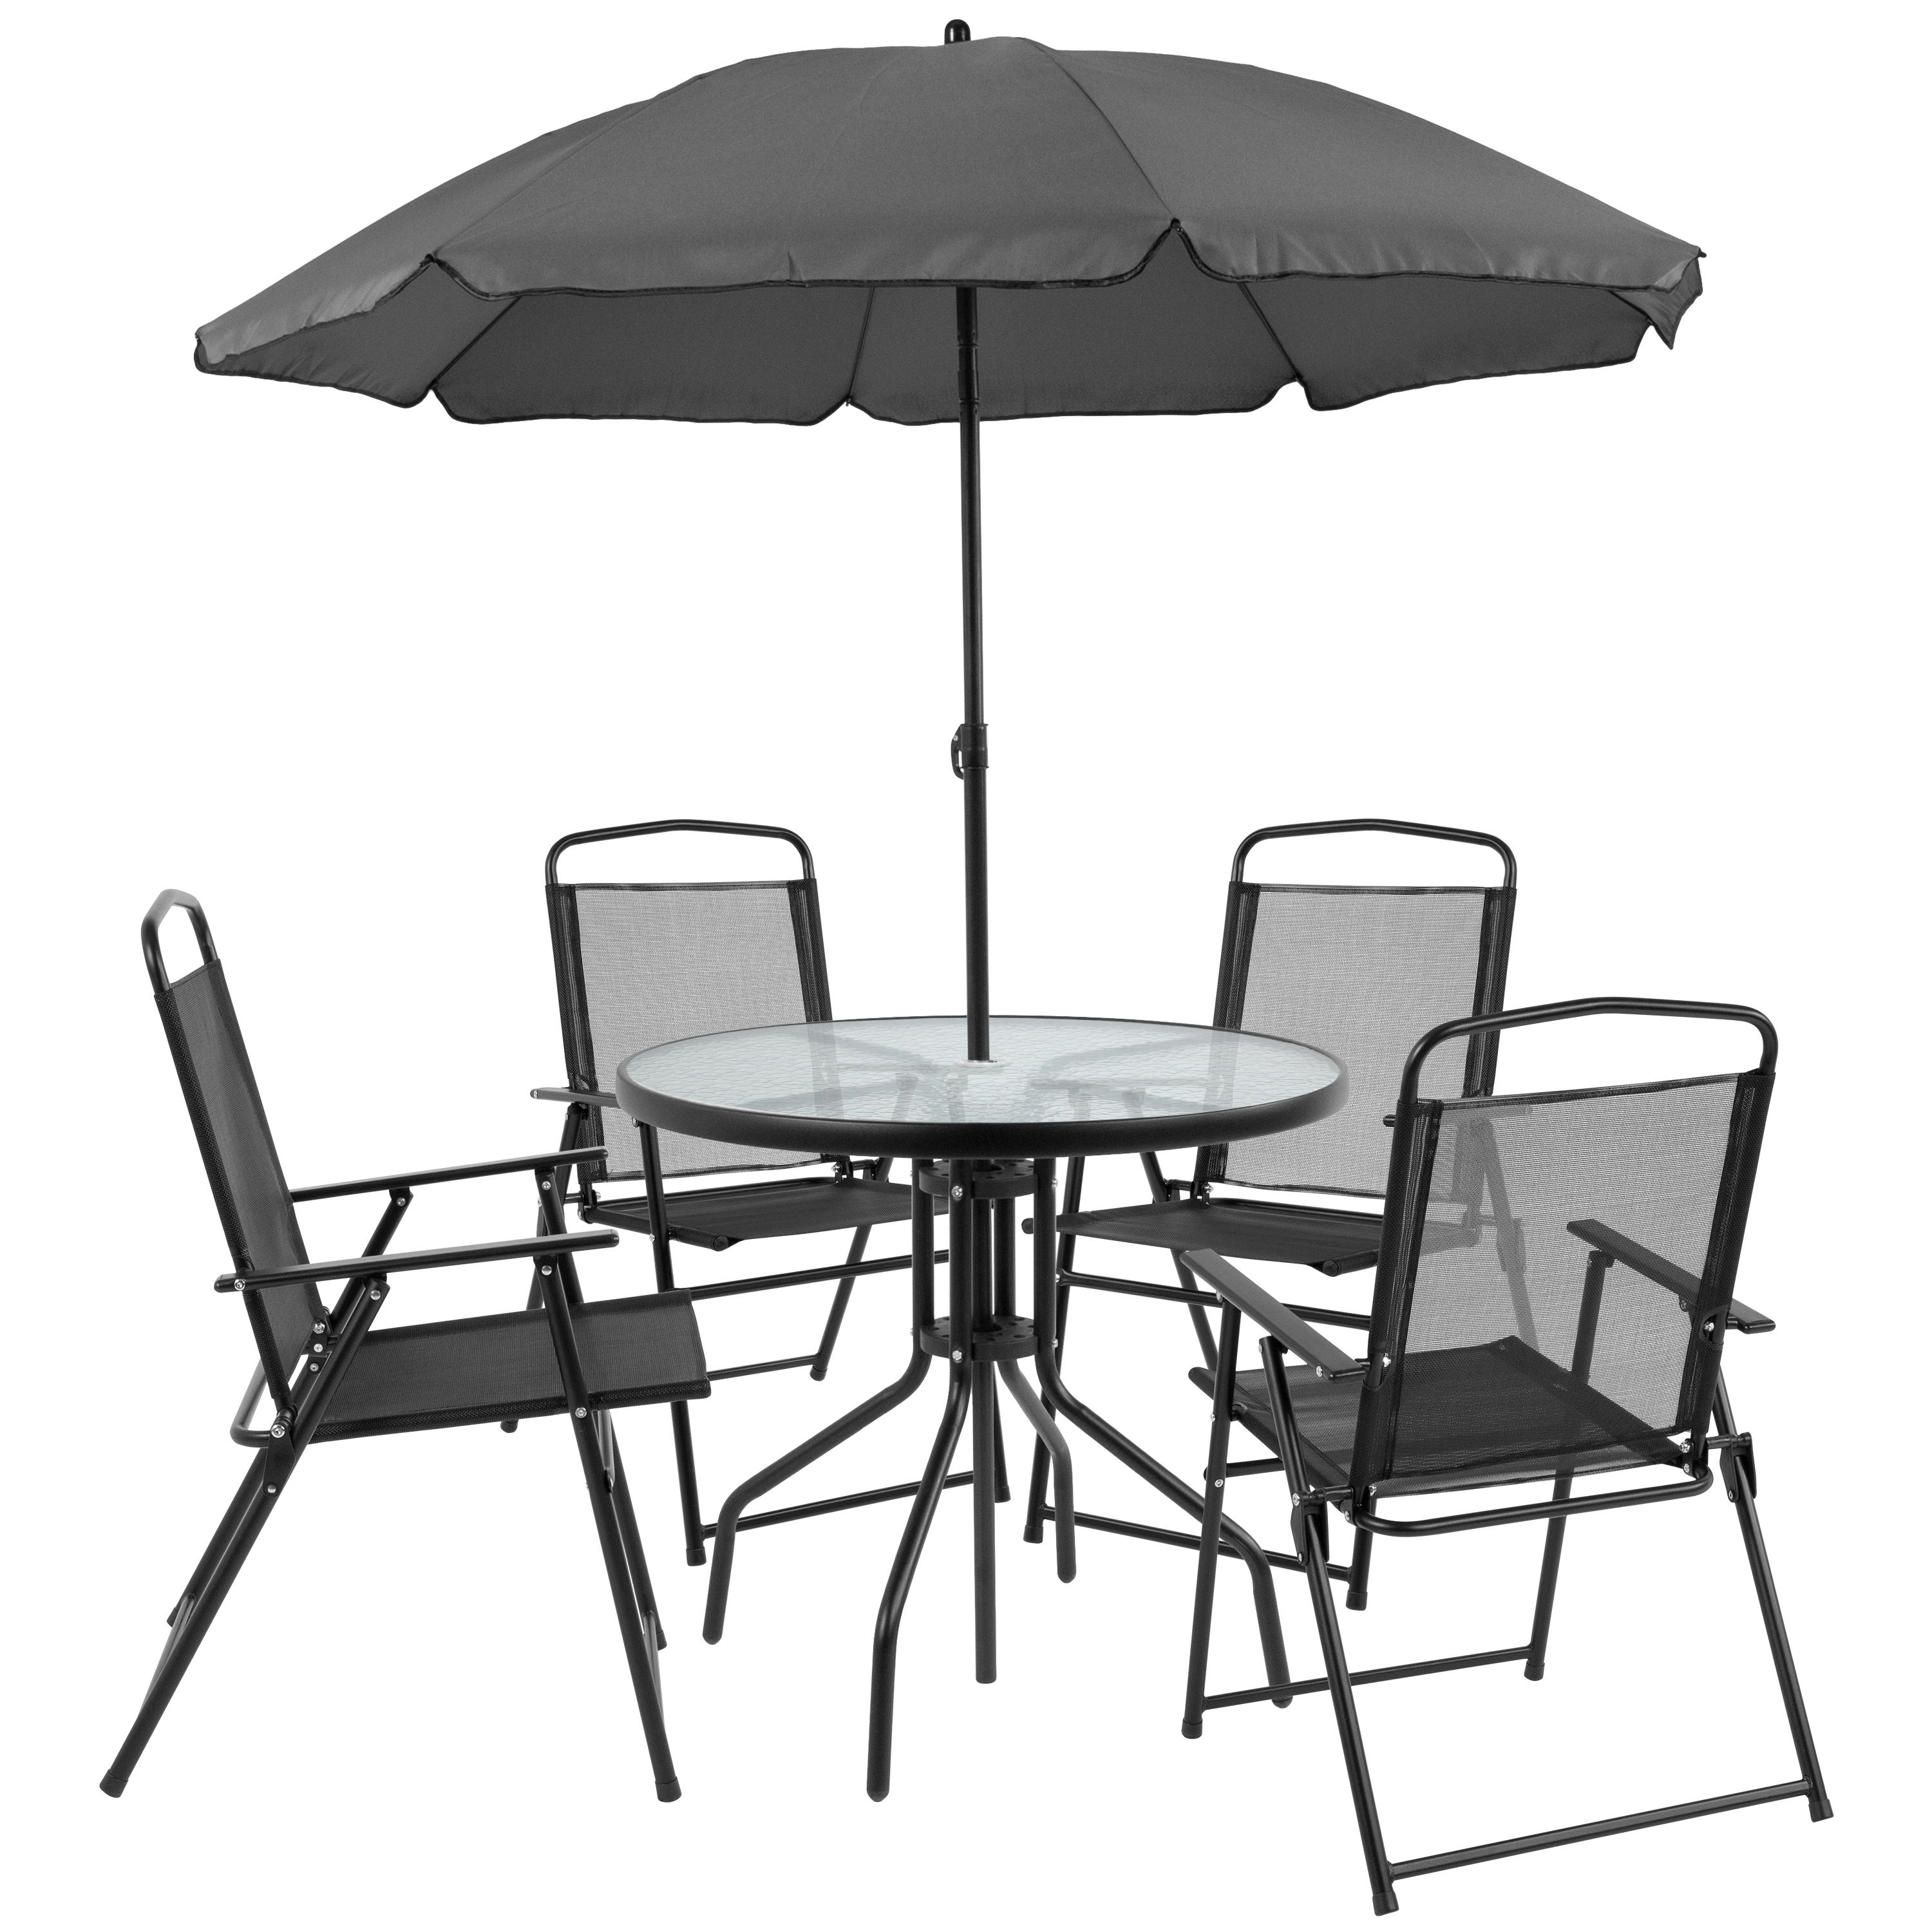 Flash Furniture Nantucket 6-Piece Patio Set with Glass Table, Umbrella, and 4 Folding Chairs, Black - image 2 of 16